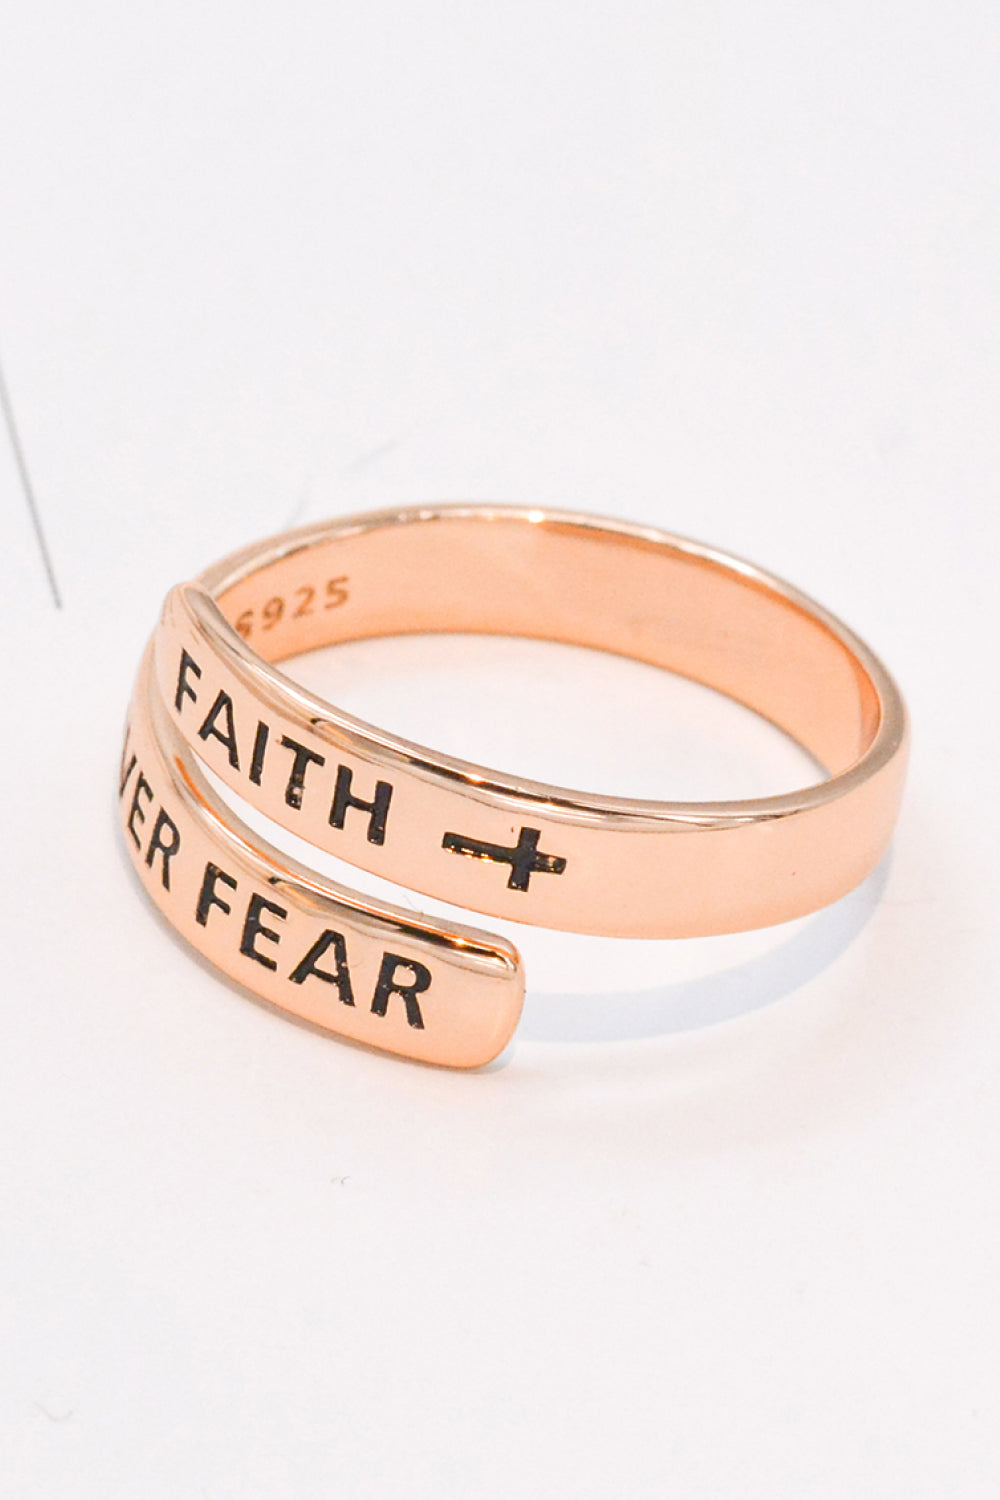 925 Sterling Silver FAITH OVER FEAR Bypass Ring The Stout Steer